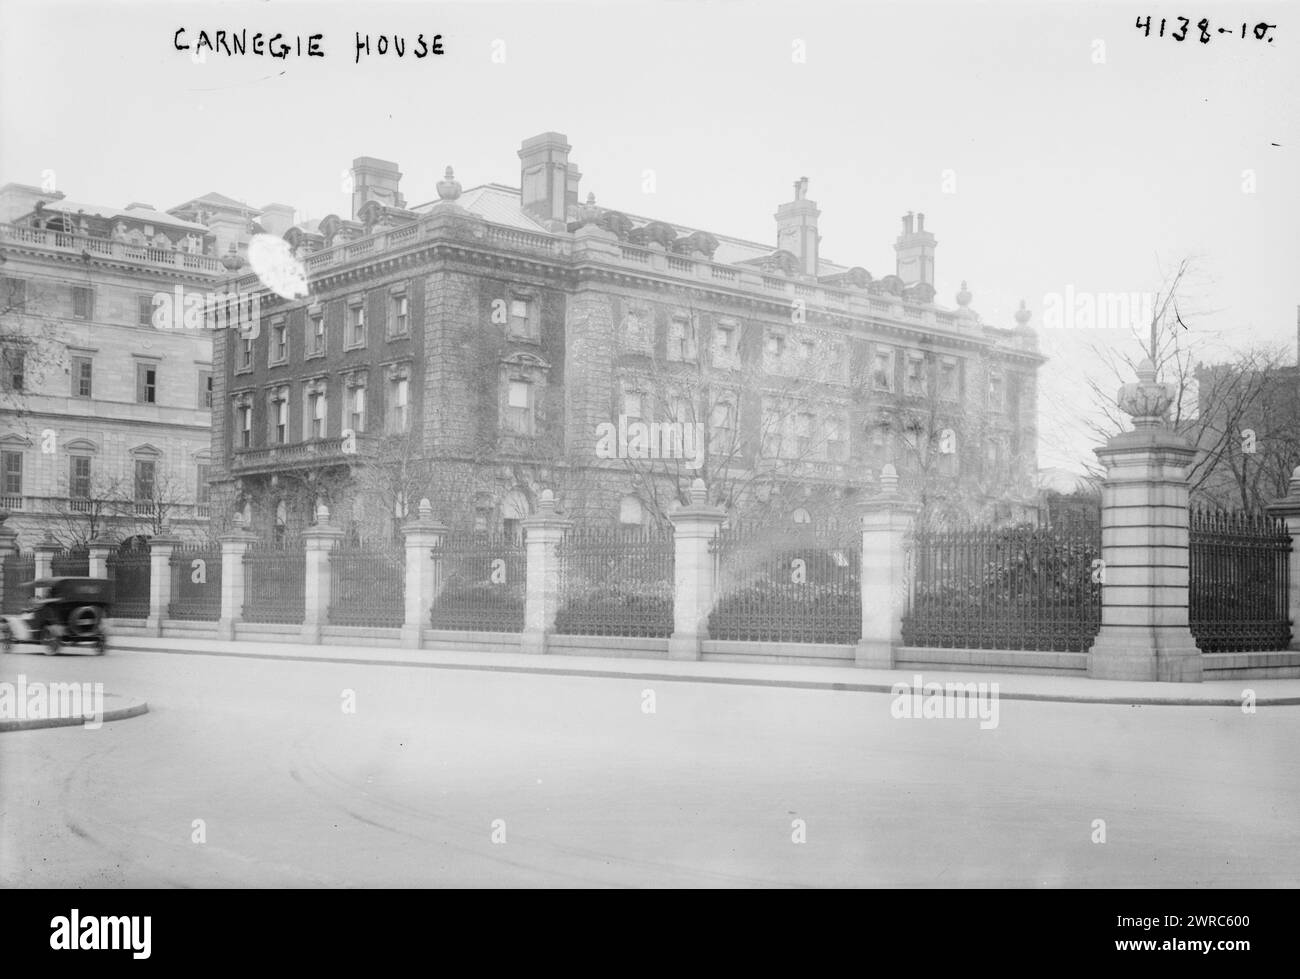 Carnegie House, Photograph shows the mansion home of Andrew Carnagie, at 91st Street and Fifth Avenue, now the Cooper-Hewitt Design Museum, New York City., between ca. 1915 and ca. 1920, Glass negatives, 1 negative: glass Stock Photo